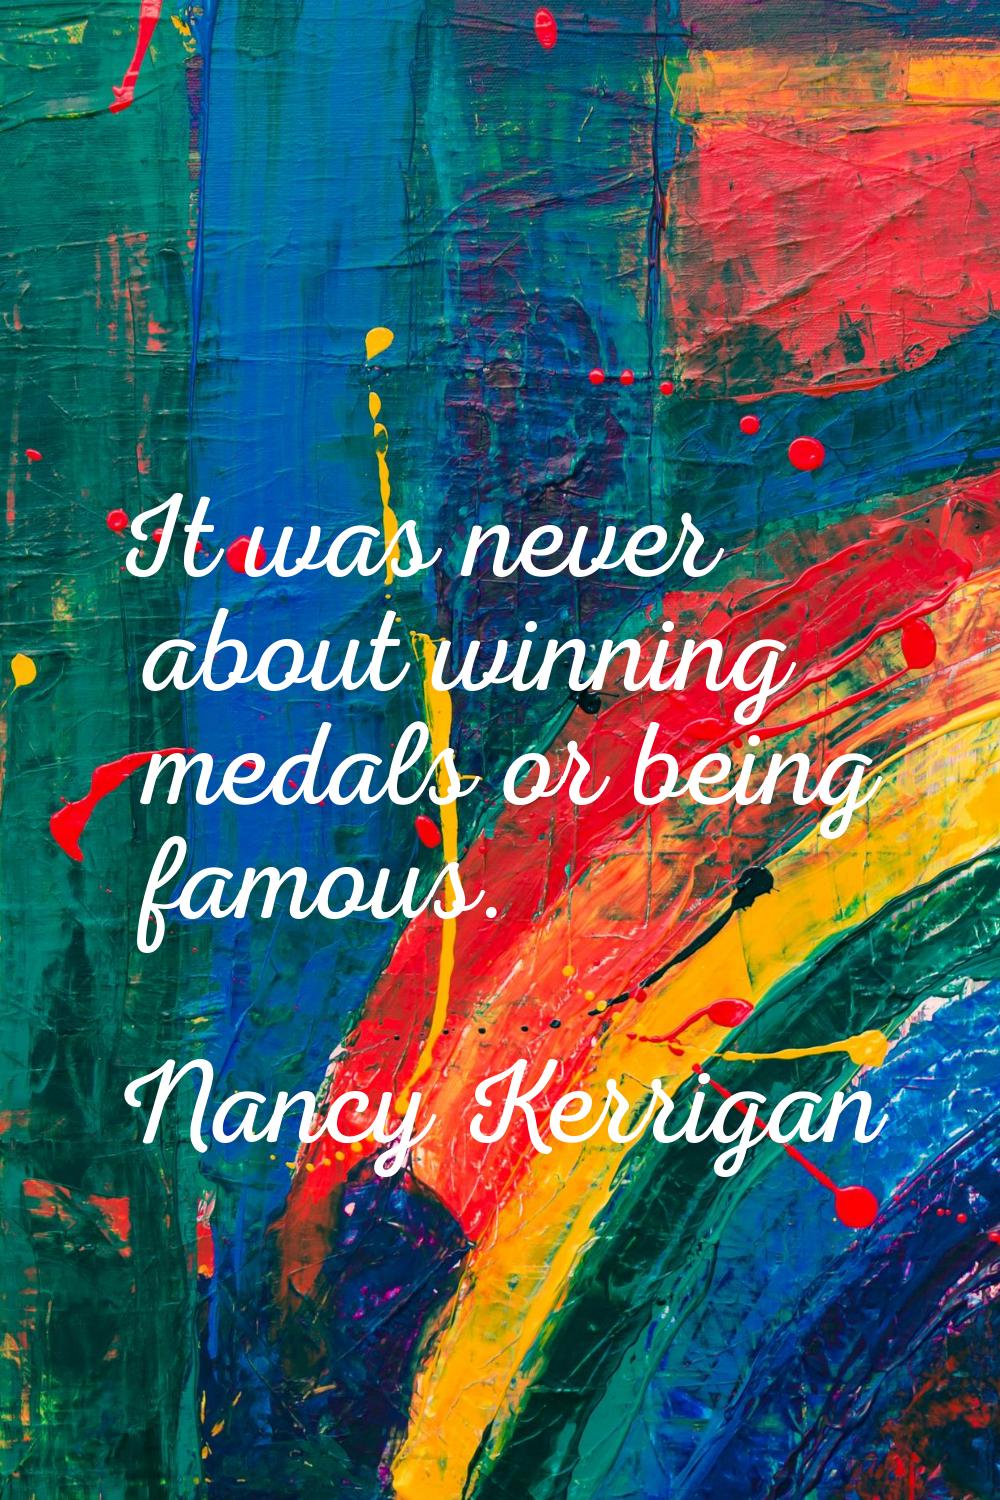 It was never about winning medals or being famous.